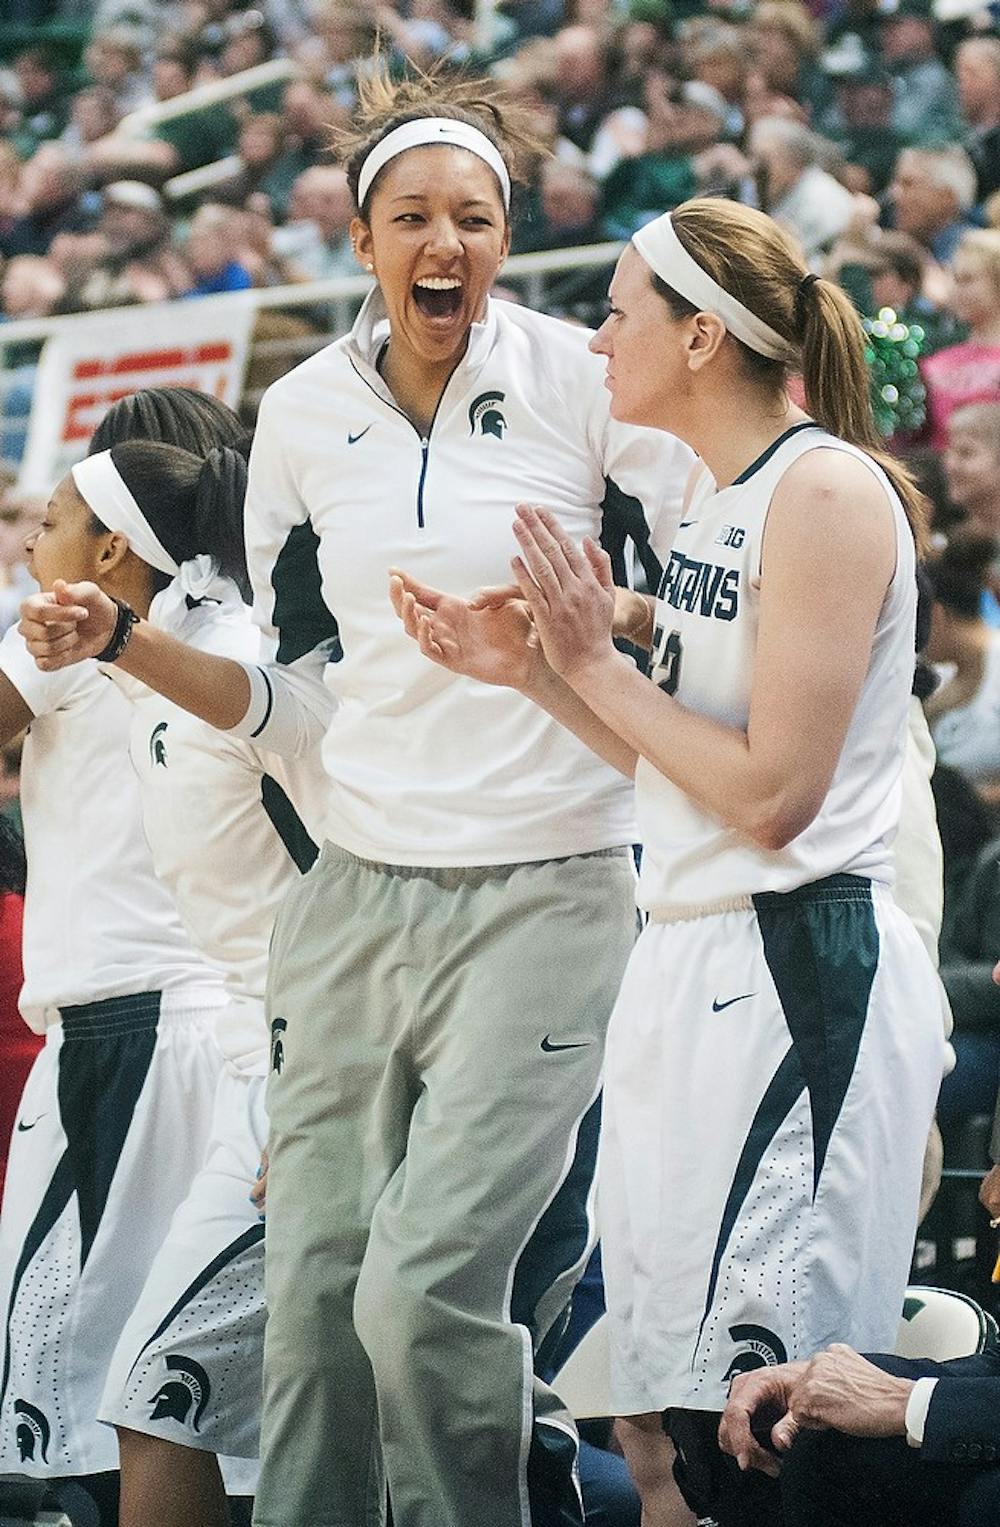 	<p>Then-sophomore center Madison Williams celebrates with then-junior guard Camille Glymph after a point is scored on the sidelines of the basketball game against Purdue on Sunday, Jan. 27, 2013 at Breslin Center. <span class="caps">MSU</span> lost the game in overtime with a final score of 67-62. Danyelle Morrow/The State News</p>